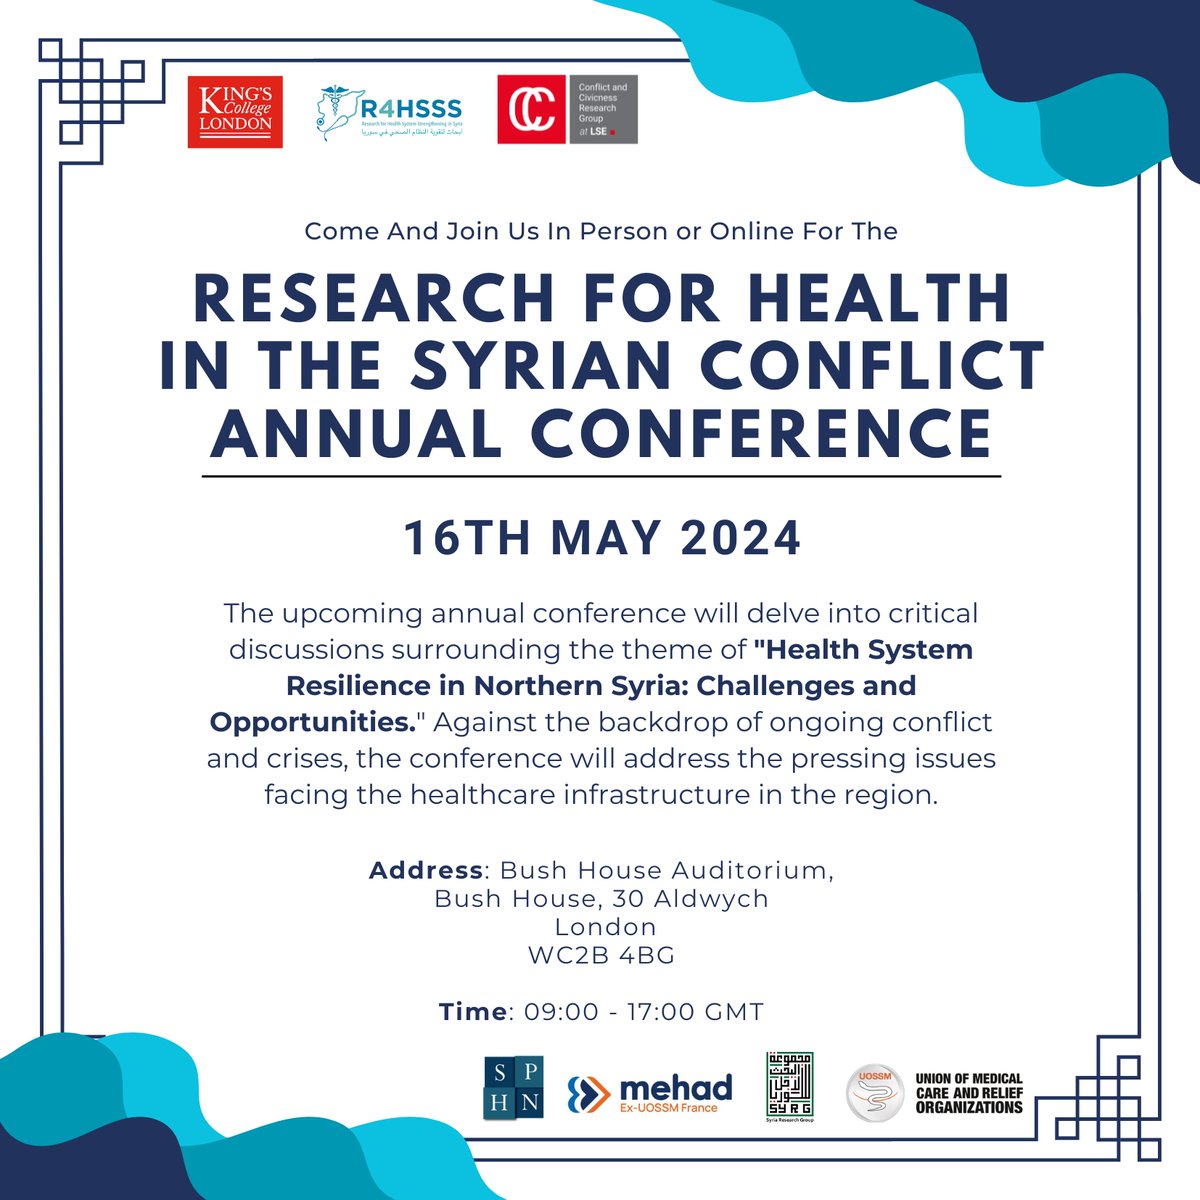 📢The Research for Health in the Syrian Conflict Annual Conference will be held tomorrow in the Bush House Auditorium at KCL ‼️Please use the main entrance to access the Bush House Building - see map & kindly ensure you arrive well in advance to allow ample time for registration